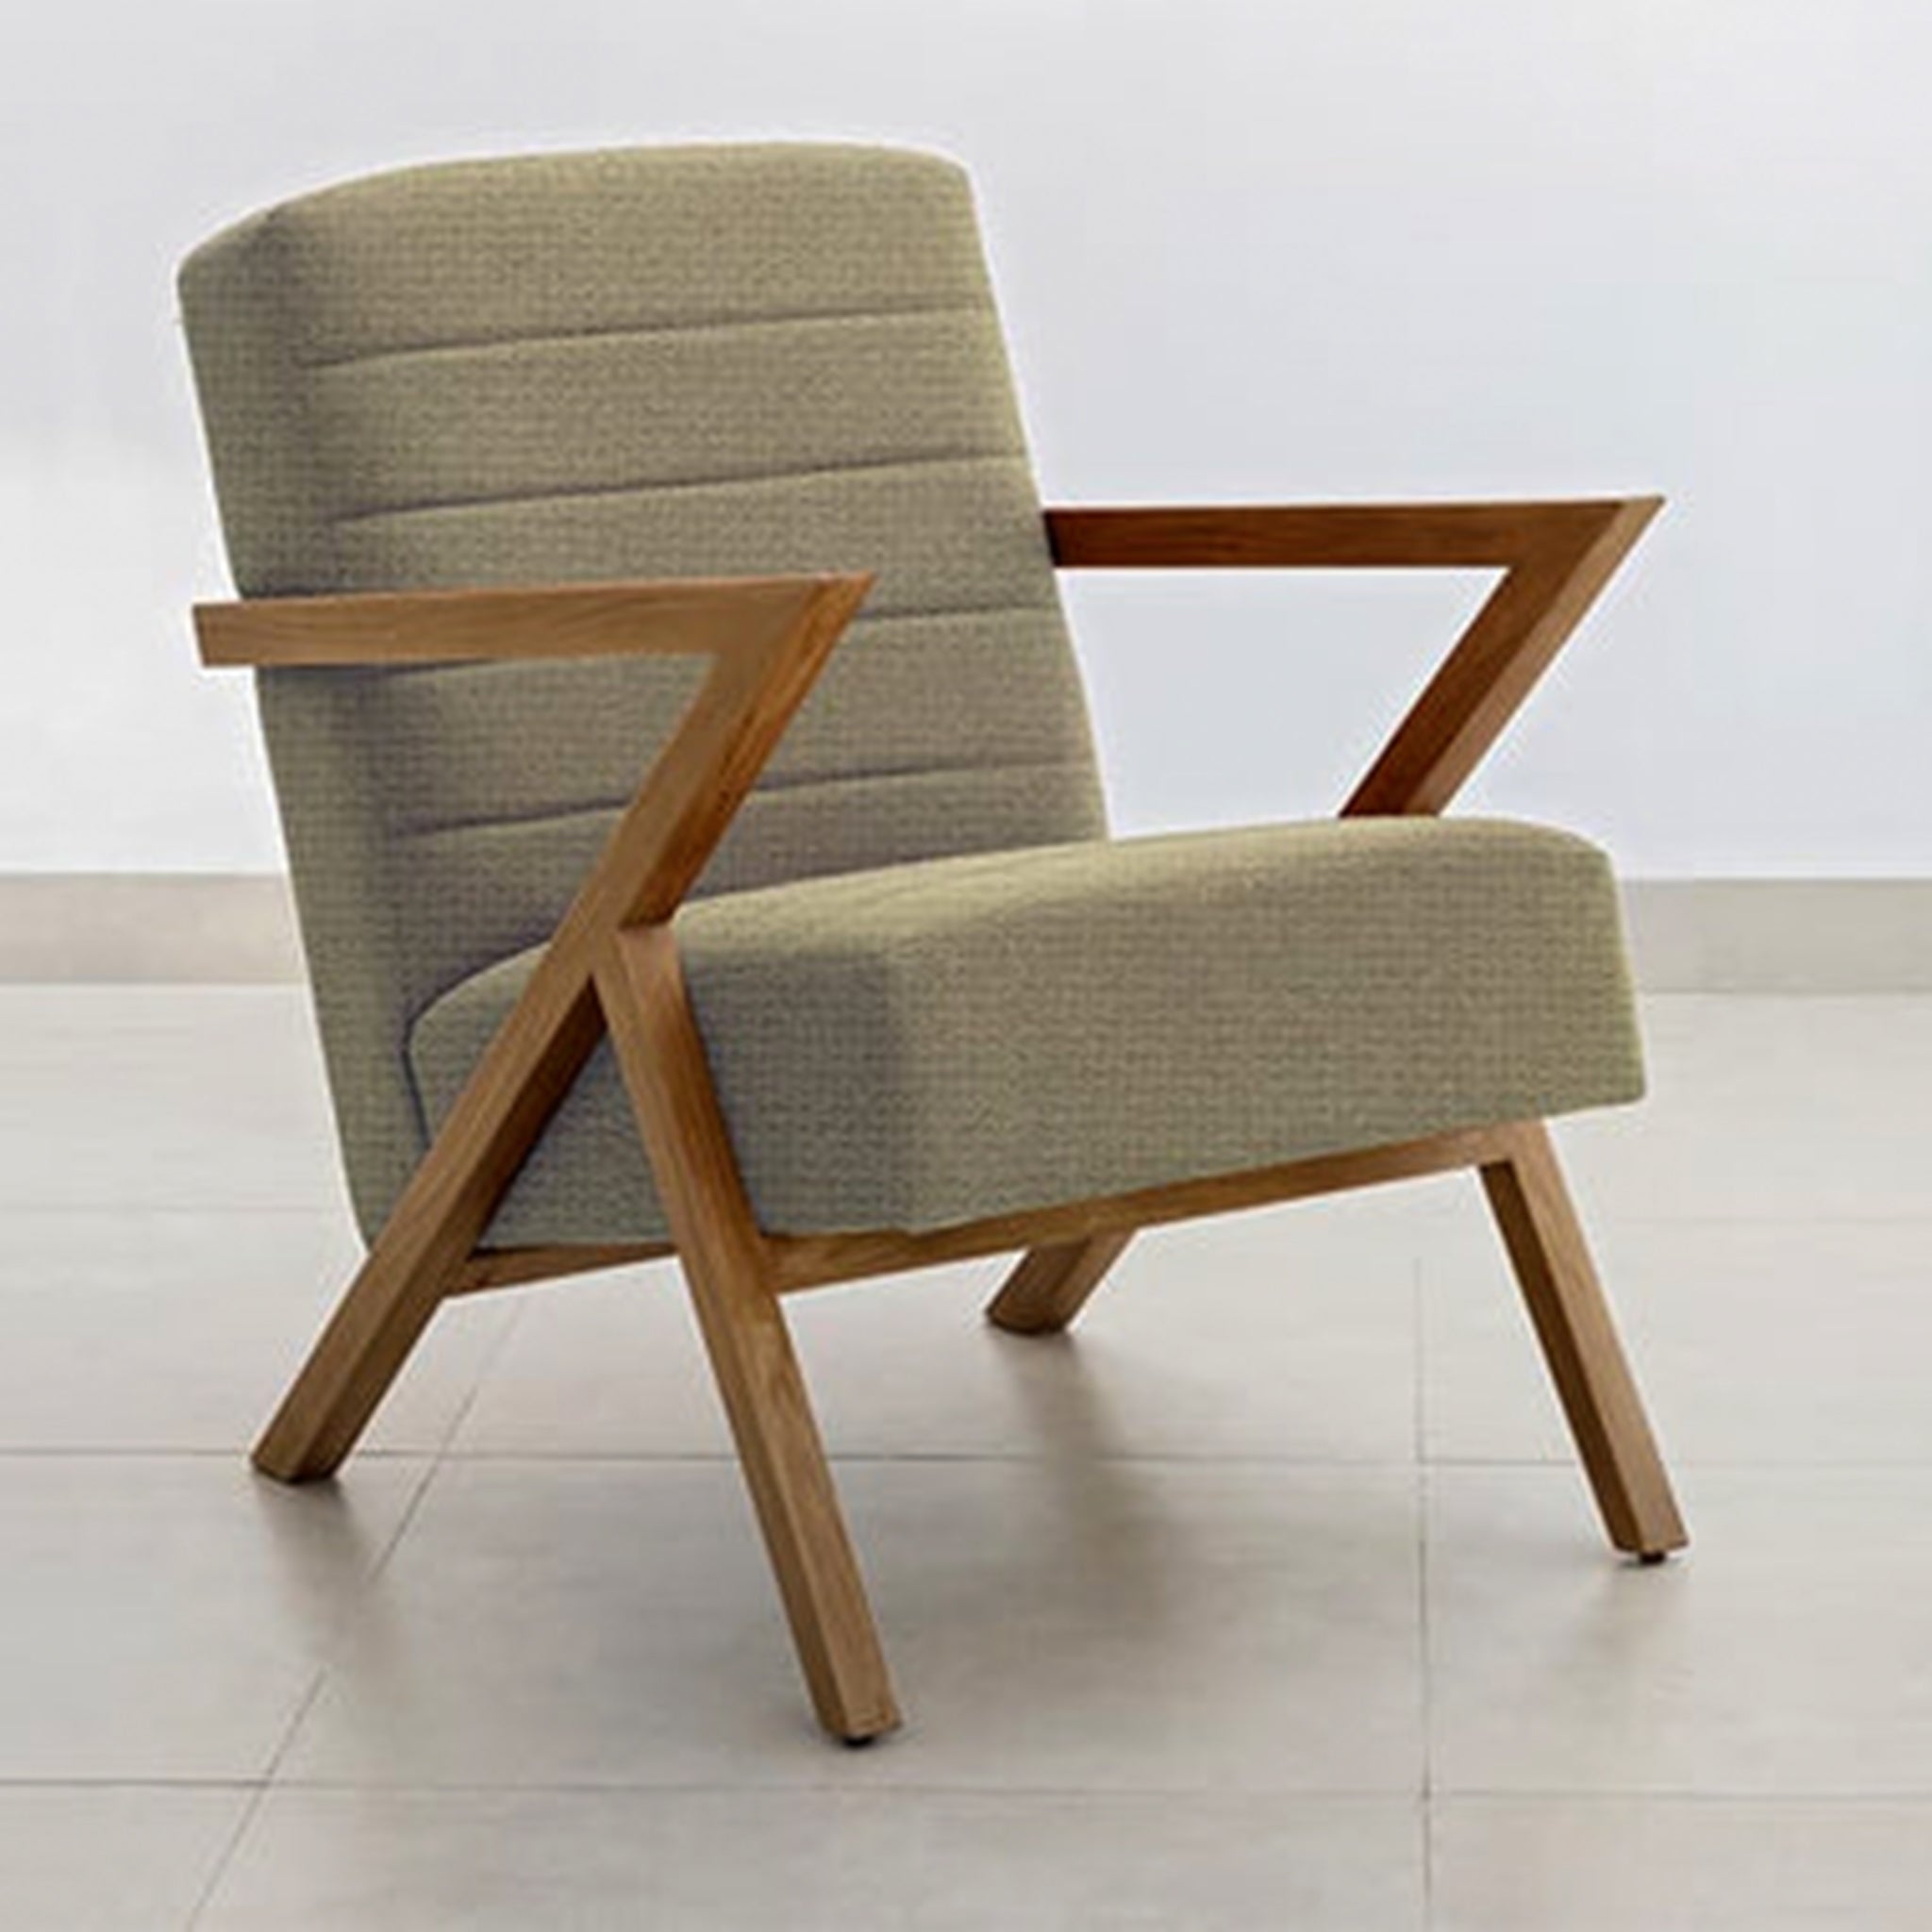 The Stanley chair – elegant seating with a wooden frame